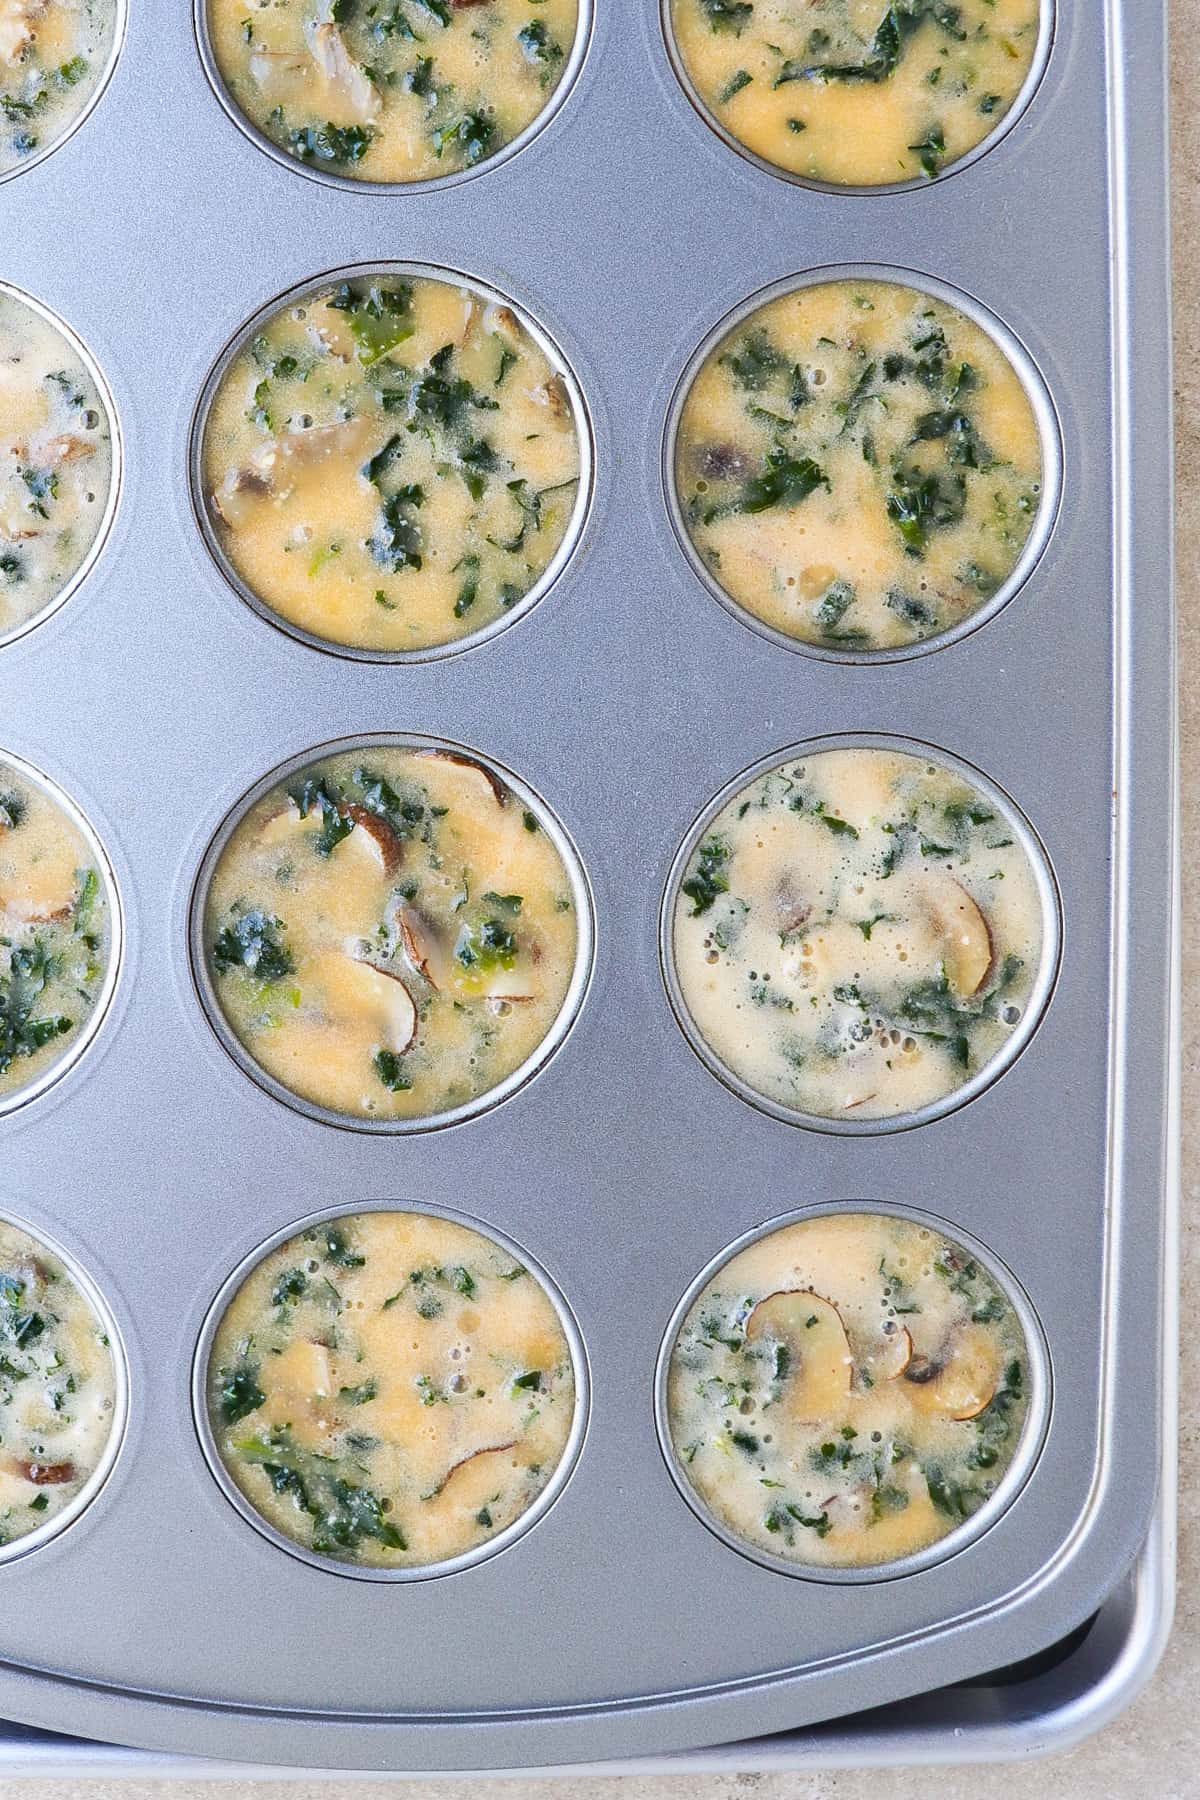 Mushroom, kale and egg mixture in muffin pan on top of a tray to make a steam bath.